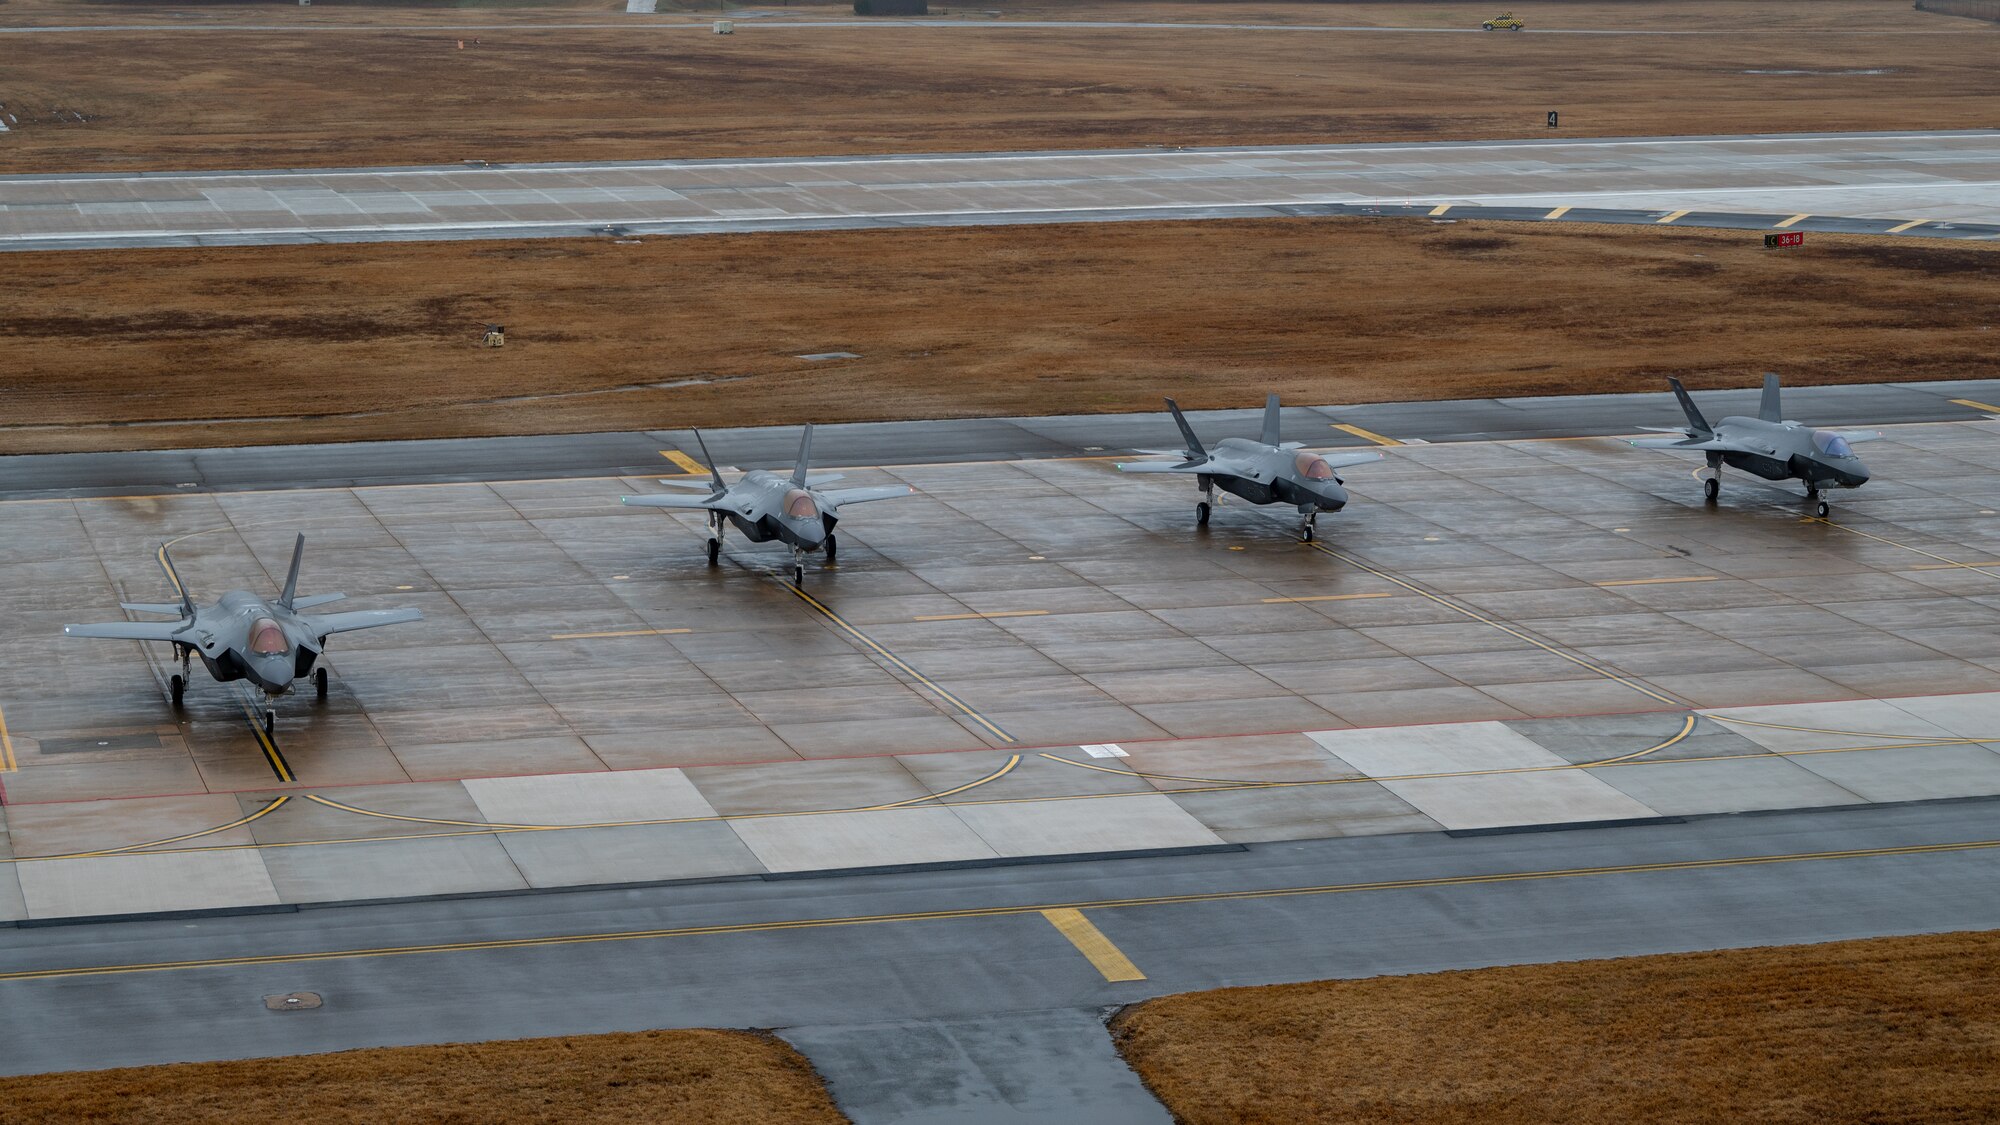 Four F-35A Lightning IIs taxi on the runway before take-off.